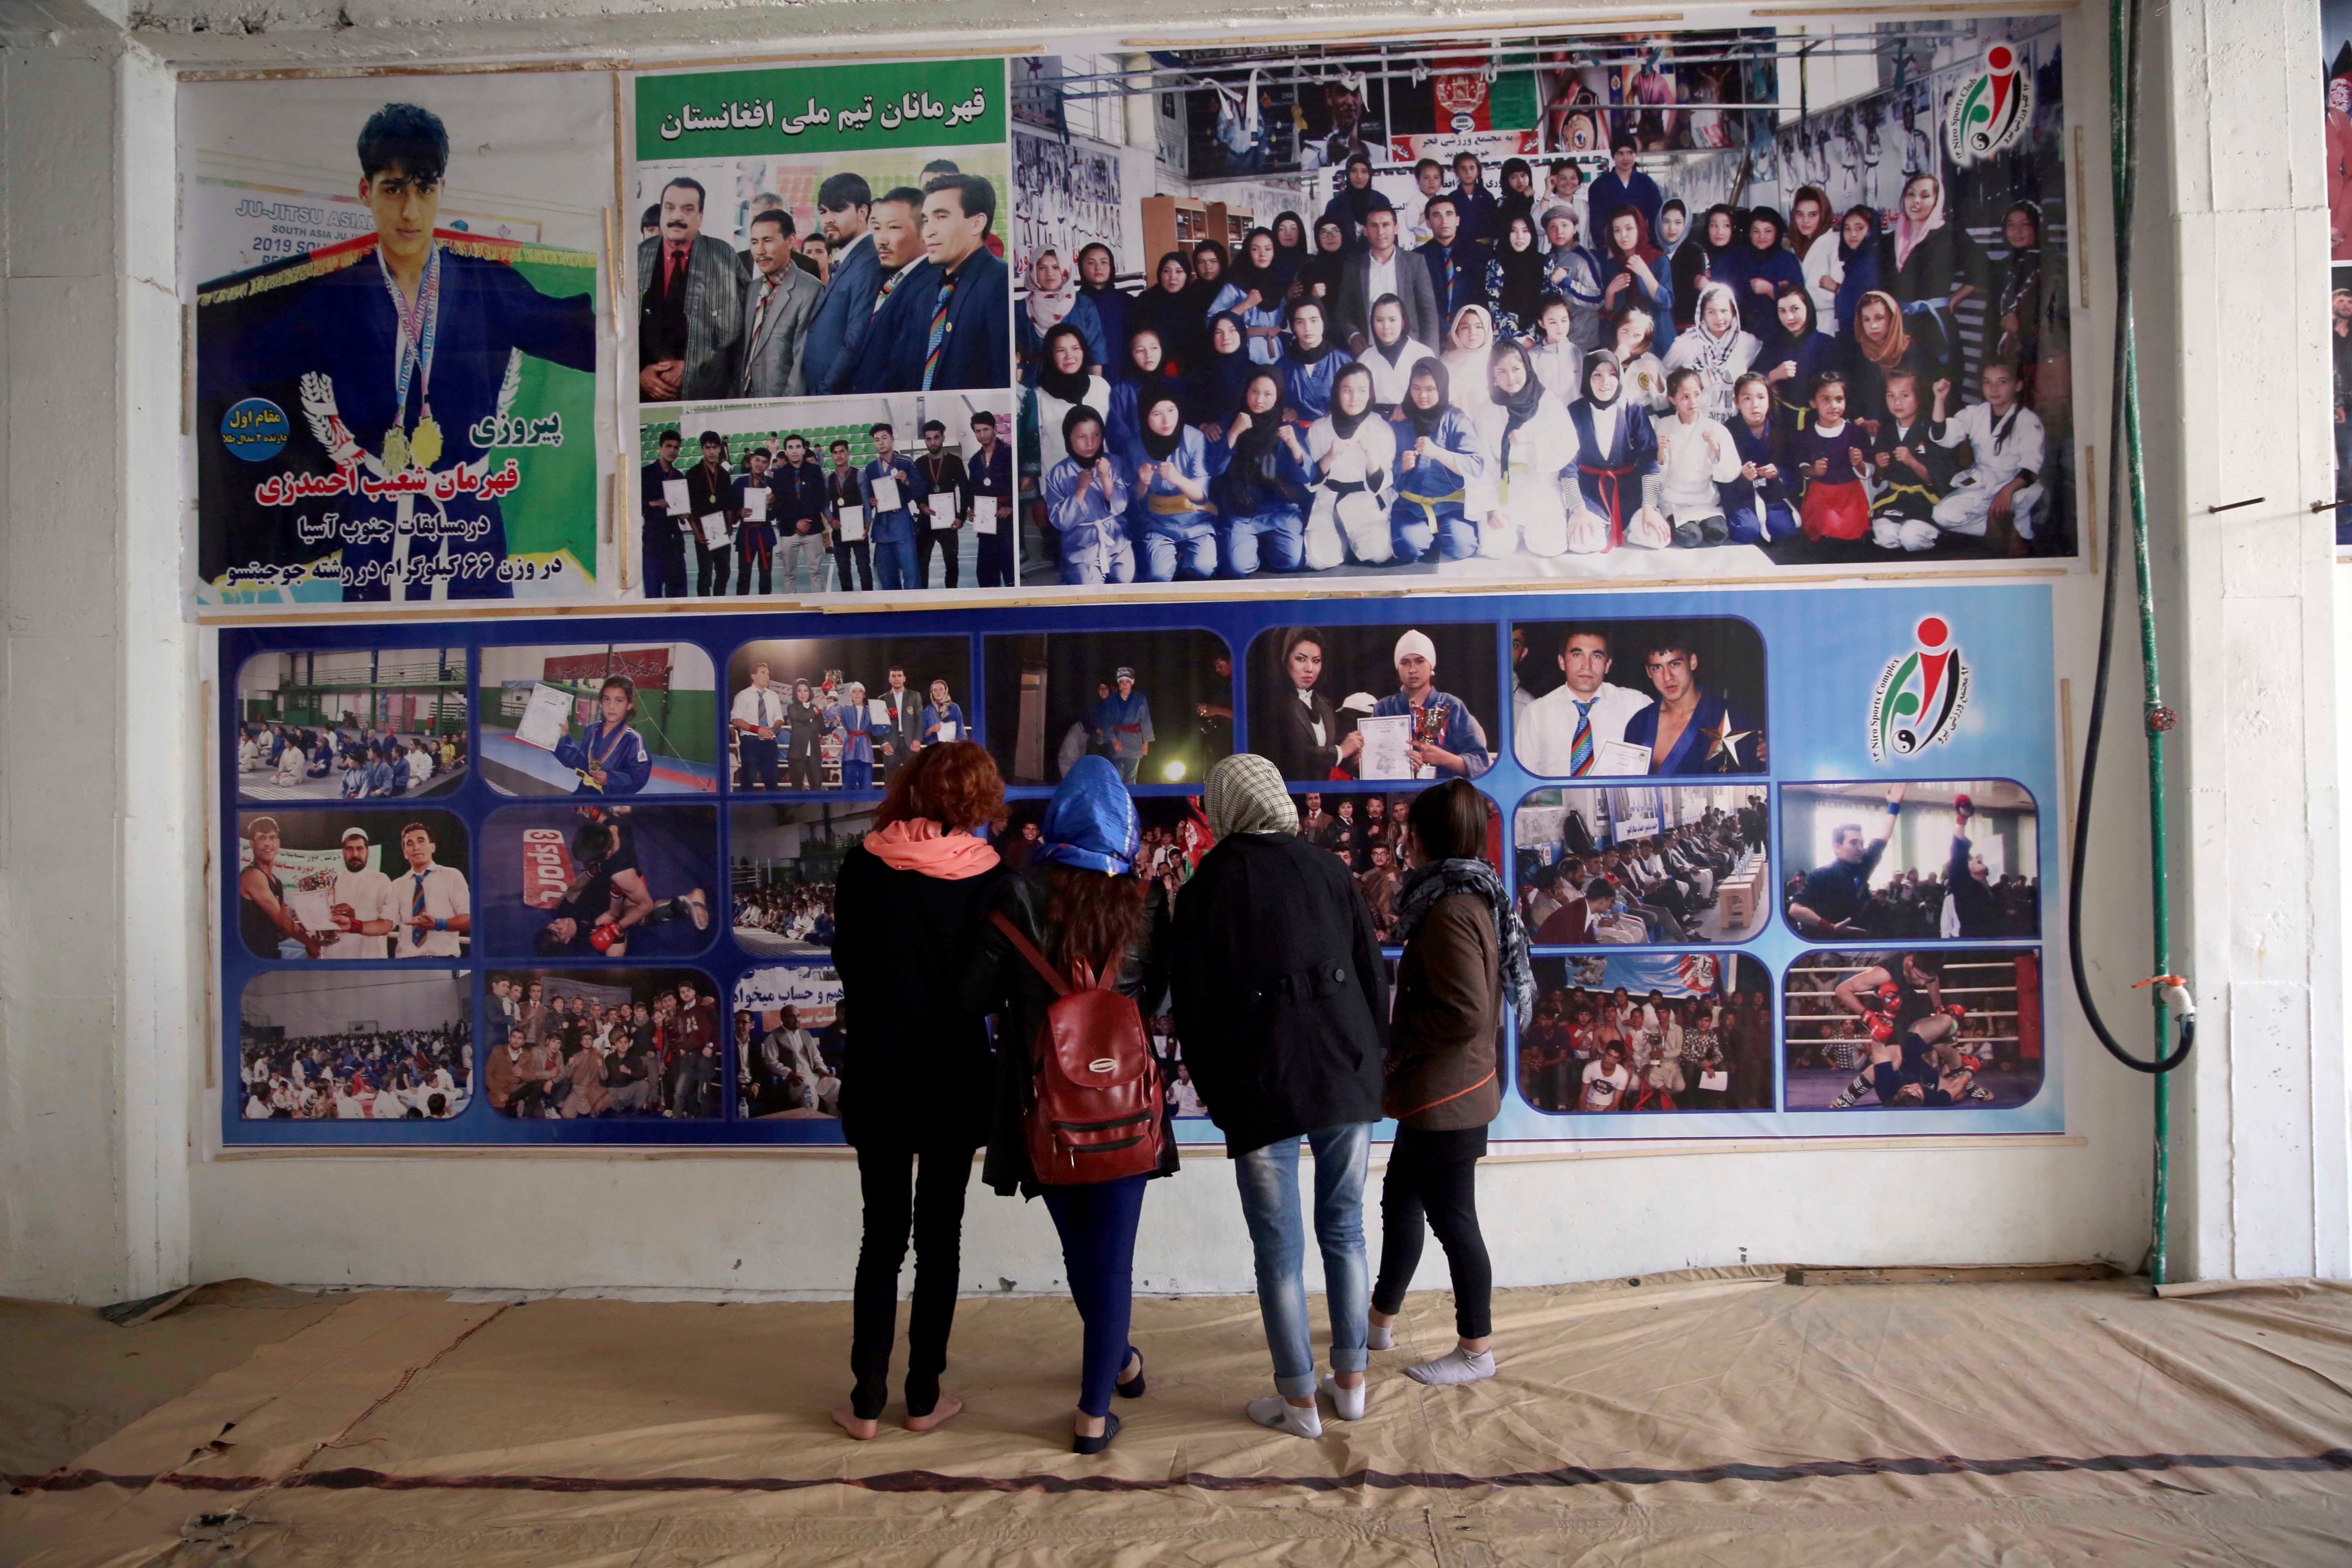 Jiu Jitsu club members look at a wall with posters at their club ahead of a training session in Kabul, Afghanistan, Saturday, Feb. 15, 2020.